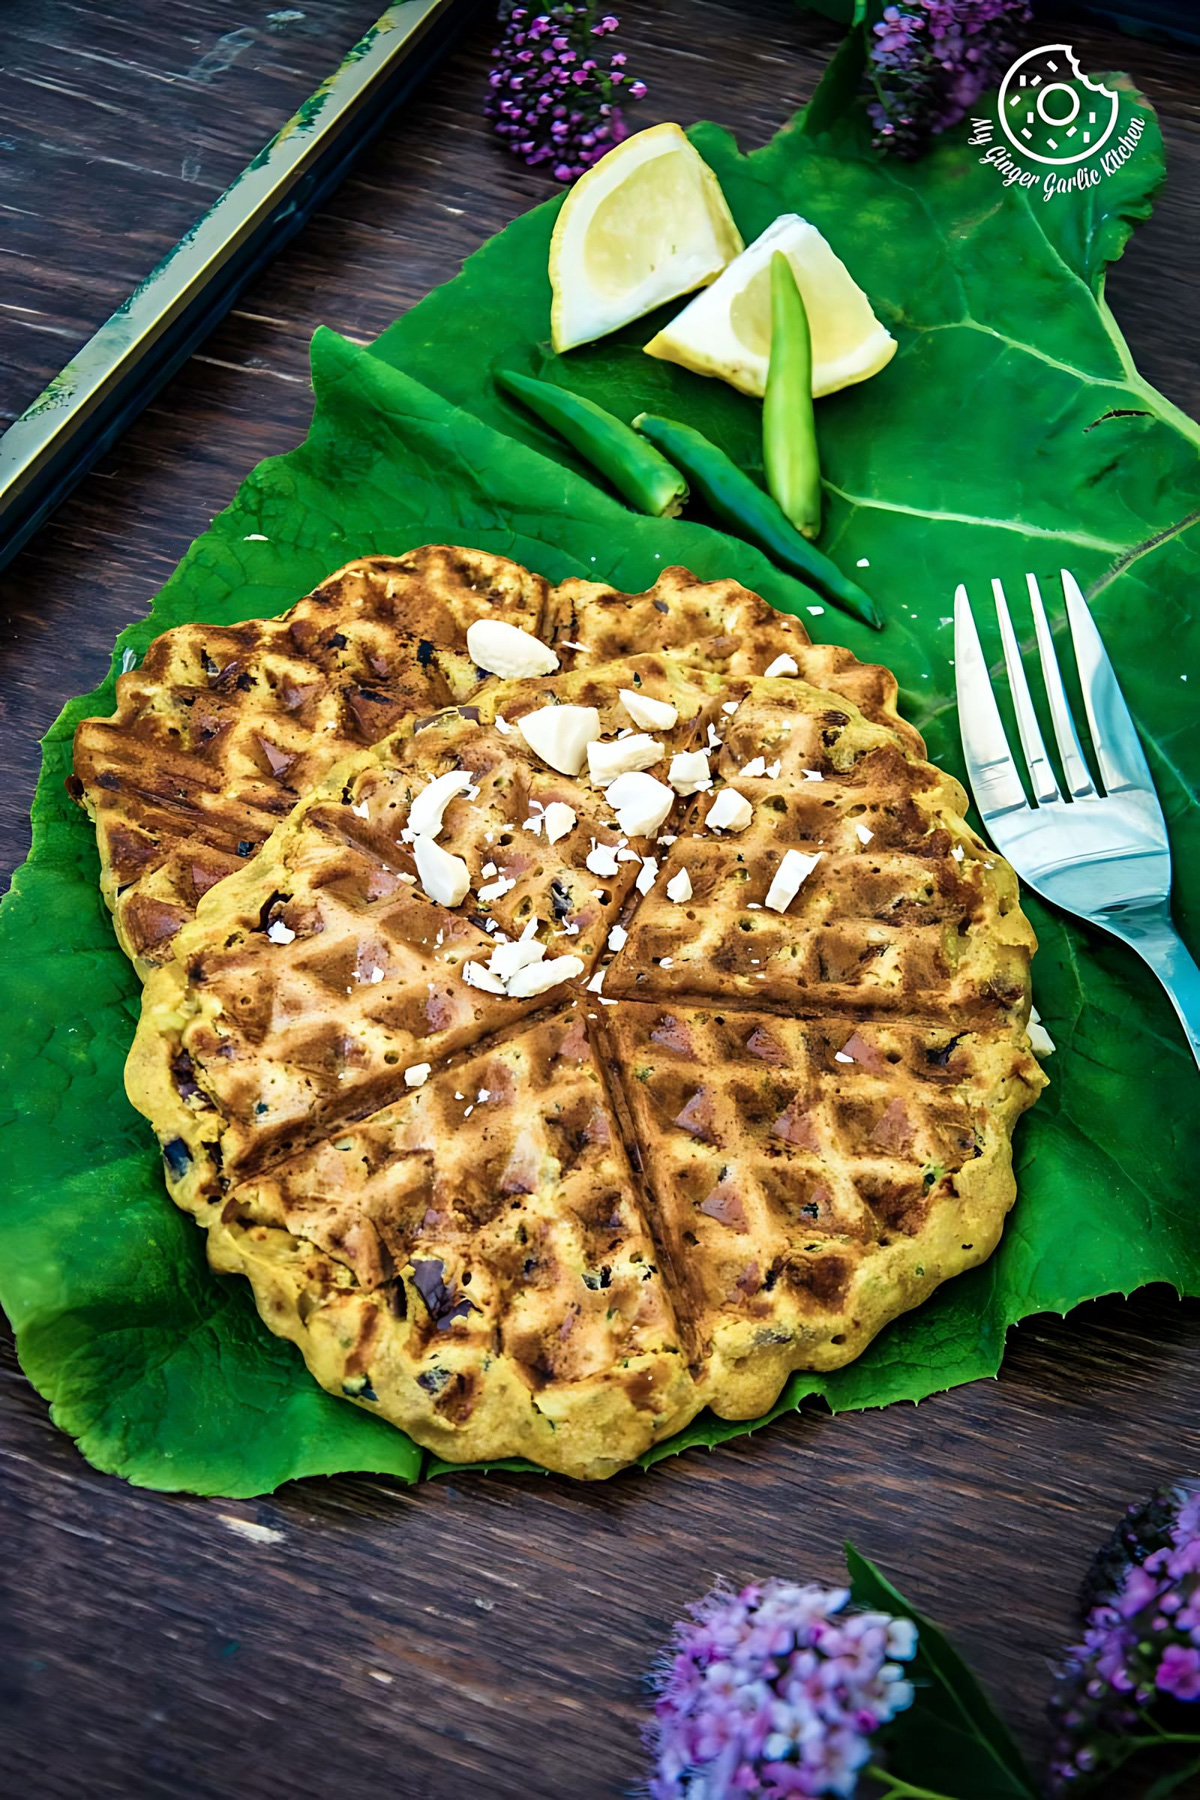 Spicy Zucchini Waffles - How to Make Waffled Besan Chilla